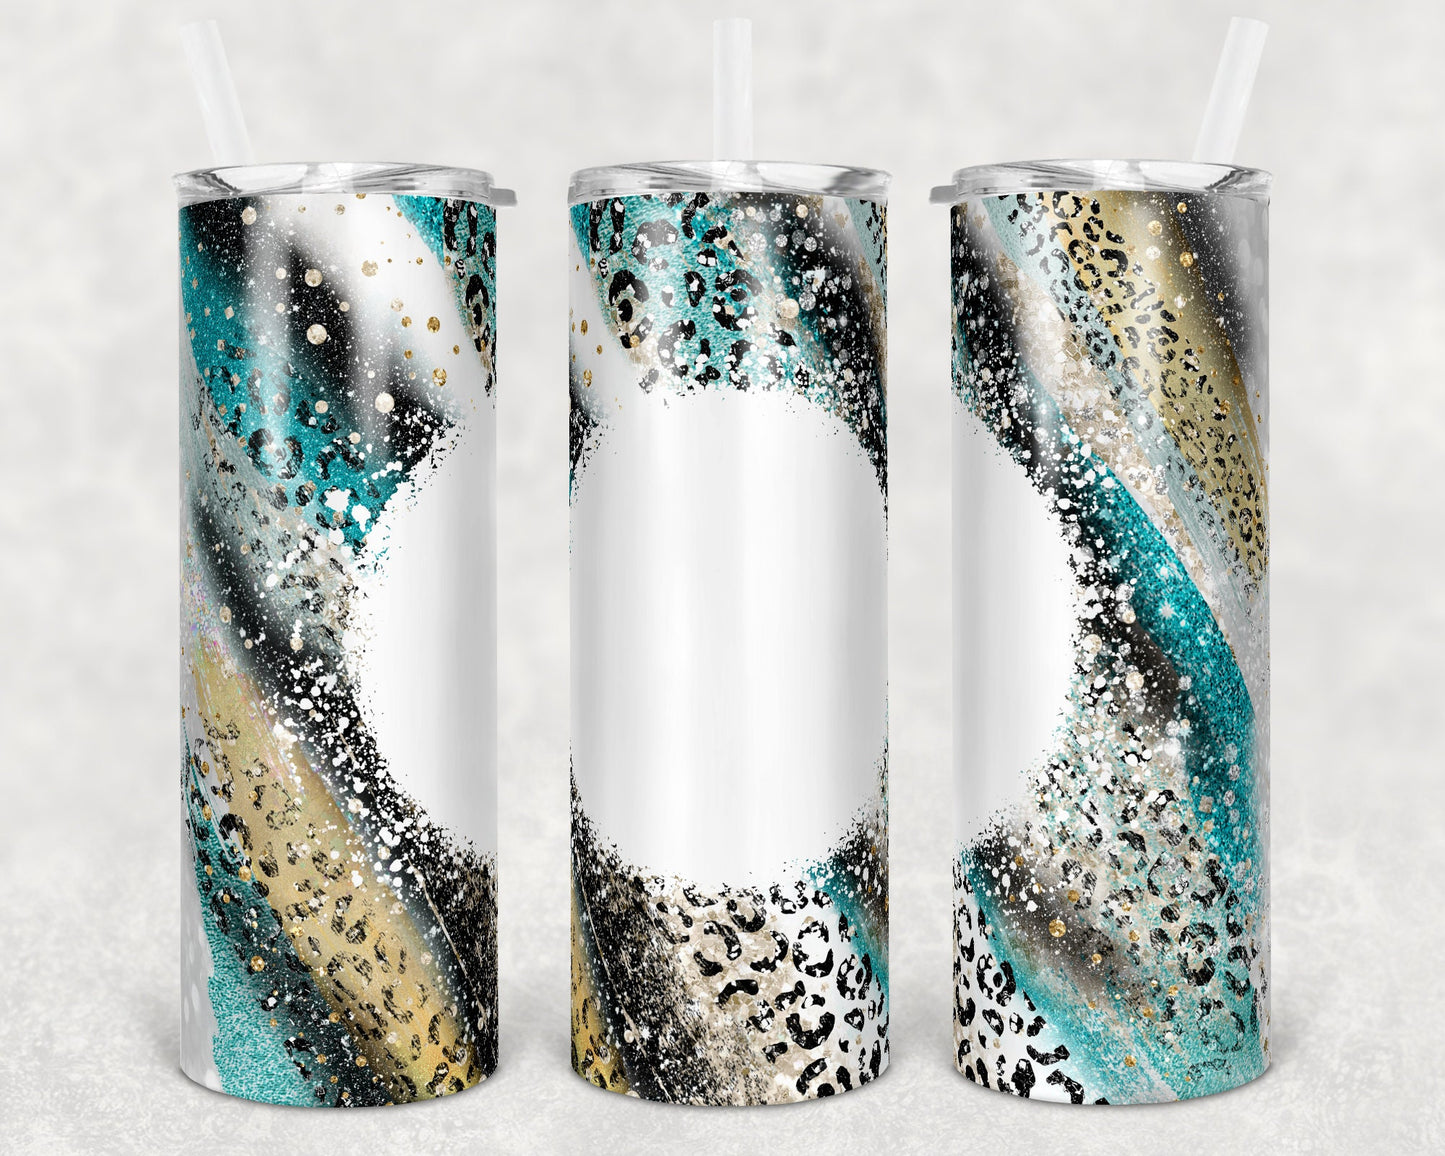 20 oz Skinny Tumbler Sublimation Template Agate Milky Way Teal Leopard Bleach Animal Print Straight and Warped Design